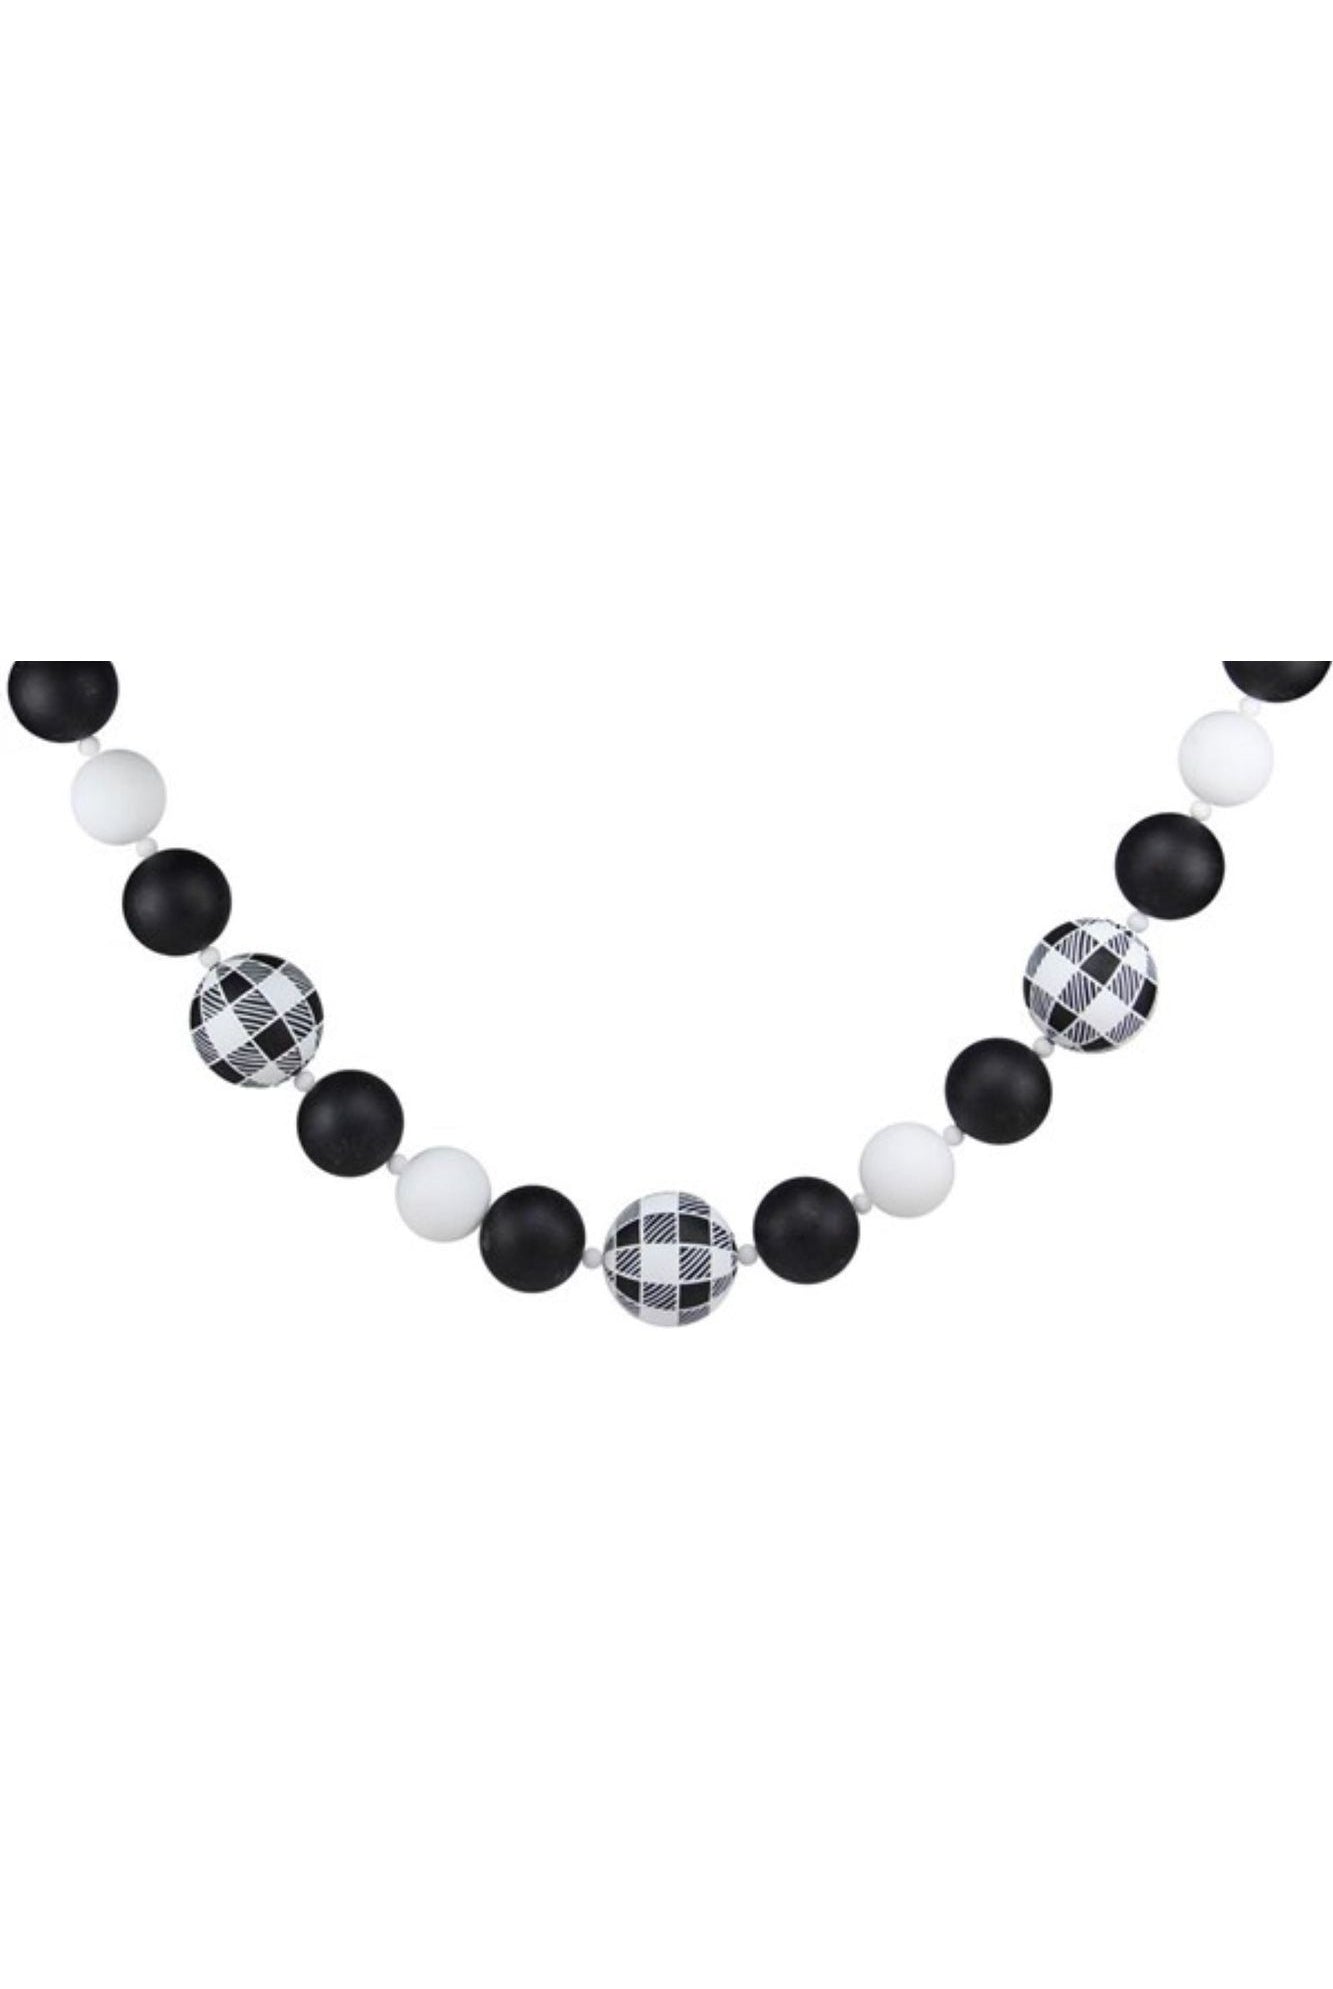 6' Check Ball Garland: Black/White - Michelle's aDOORable Creations - Garland